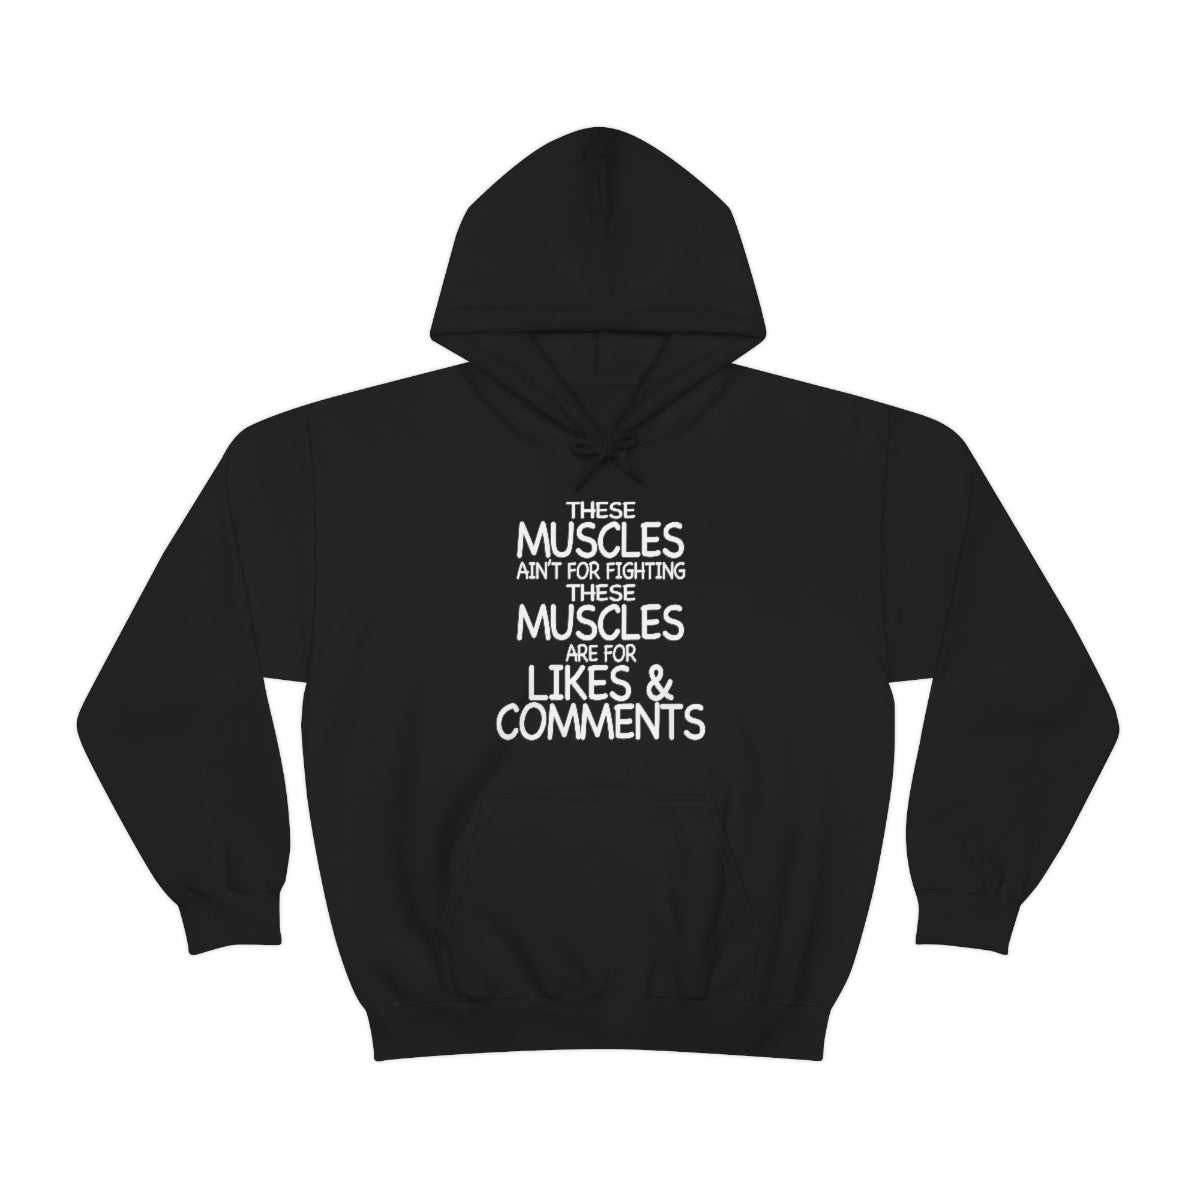 Likes & Comments Hoodie